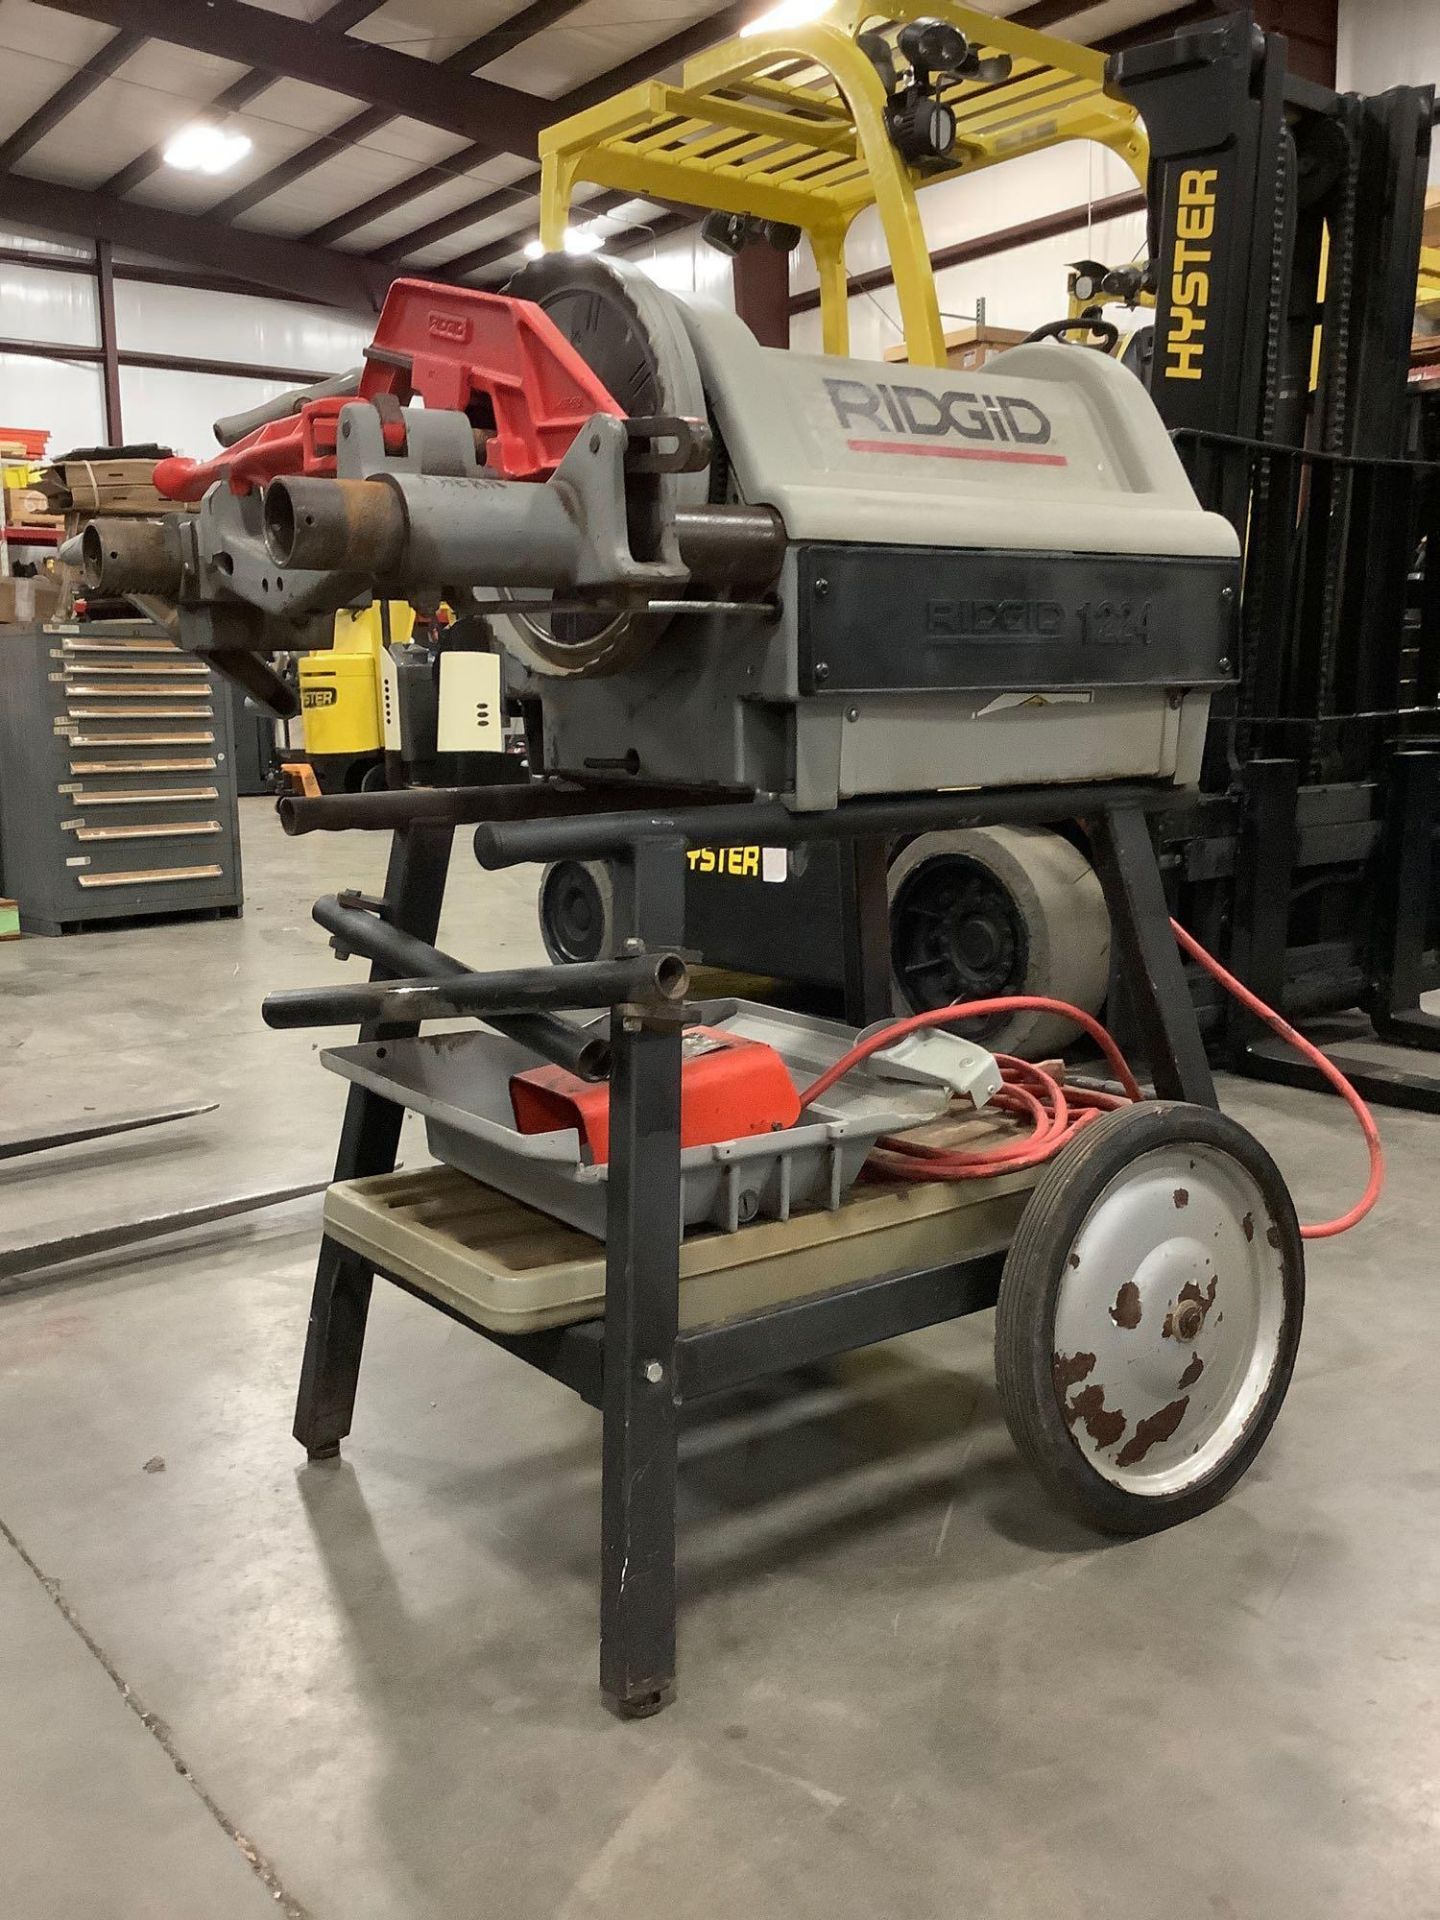 2013 ELECTRIC RIDGID PIPE THREADER MODEL 1224 WITH STAND, APPROX 120 VOLTS,APPROX AMP 15,APPROX HZ 6 - Image 4 of 10